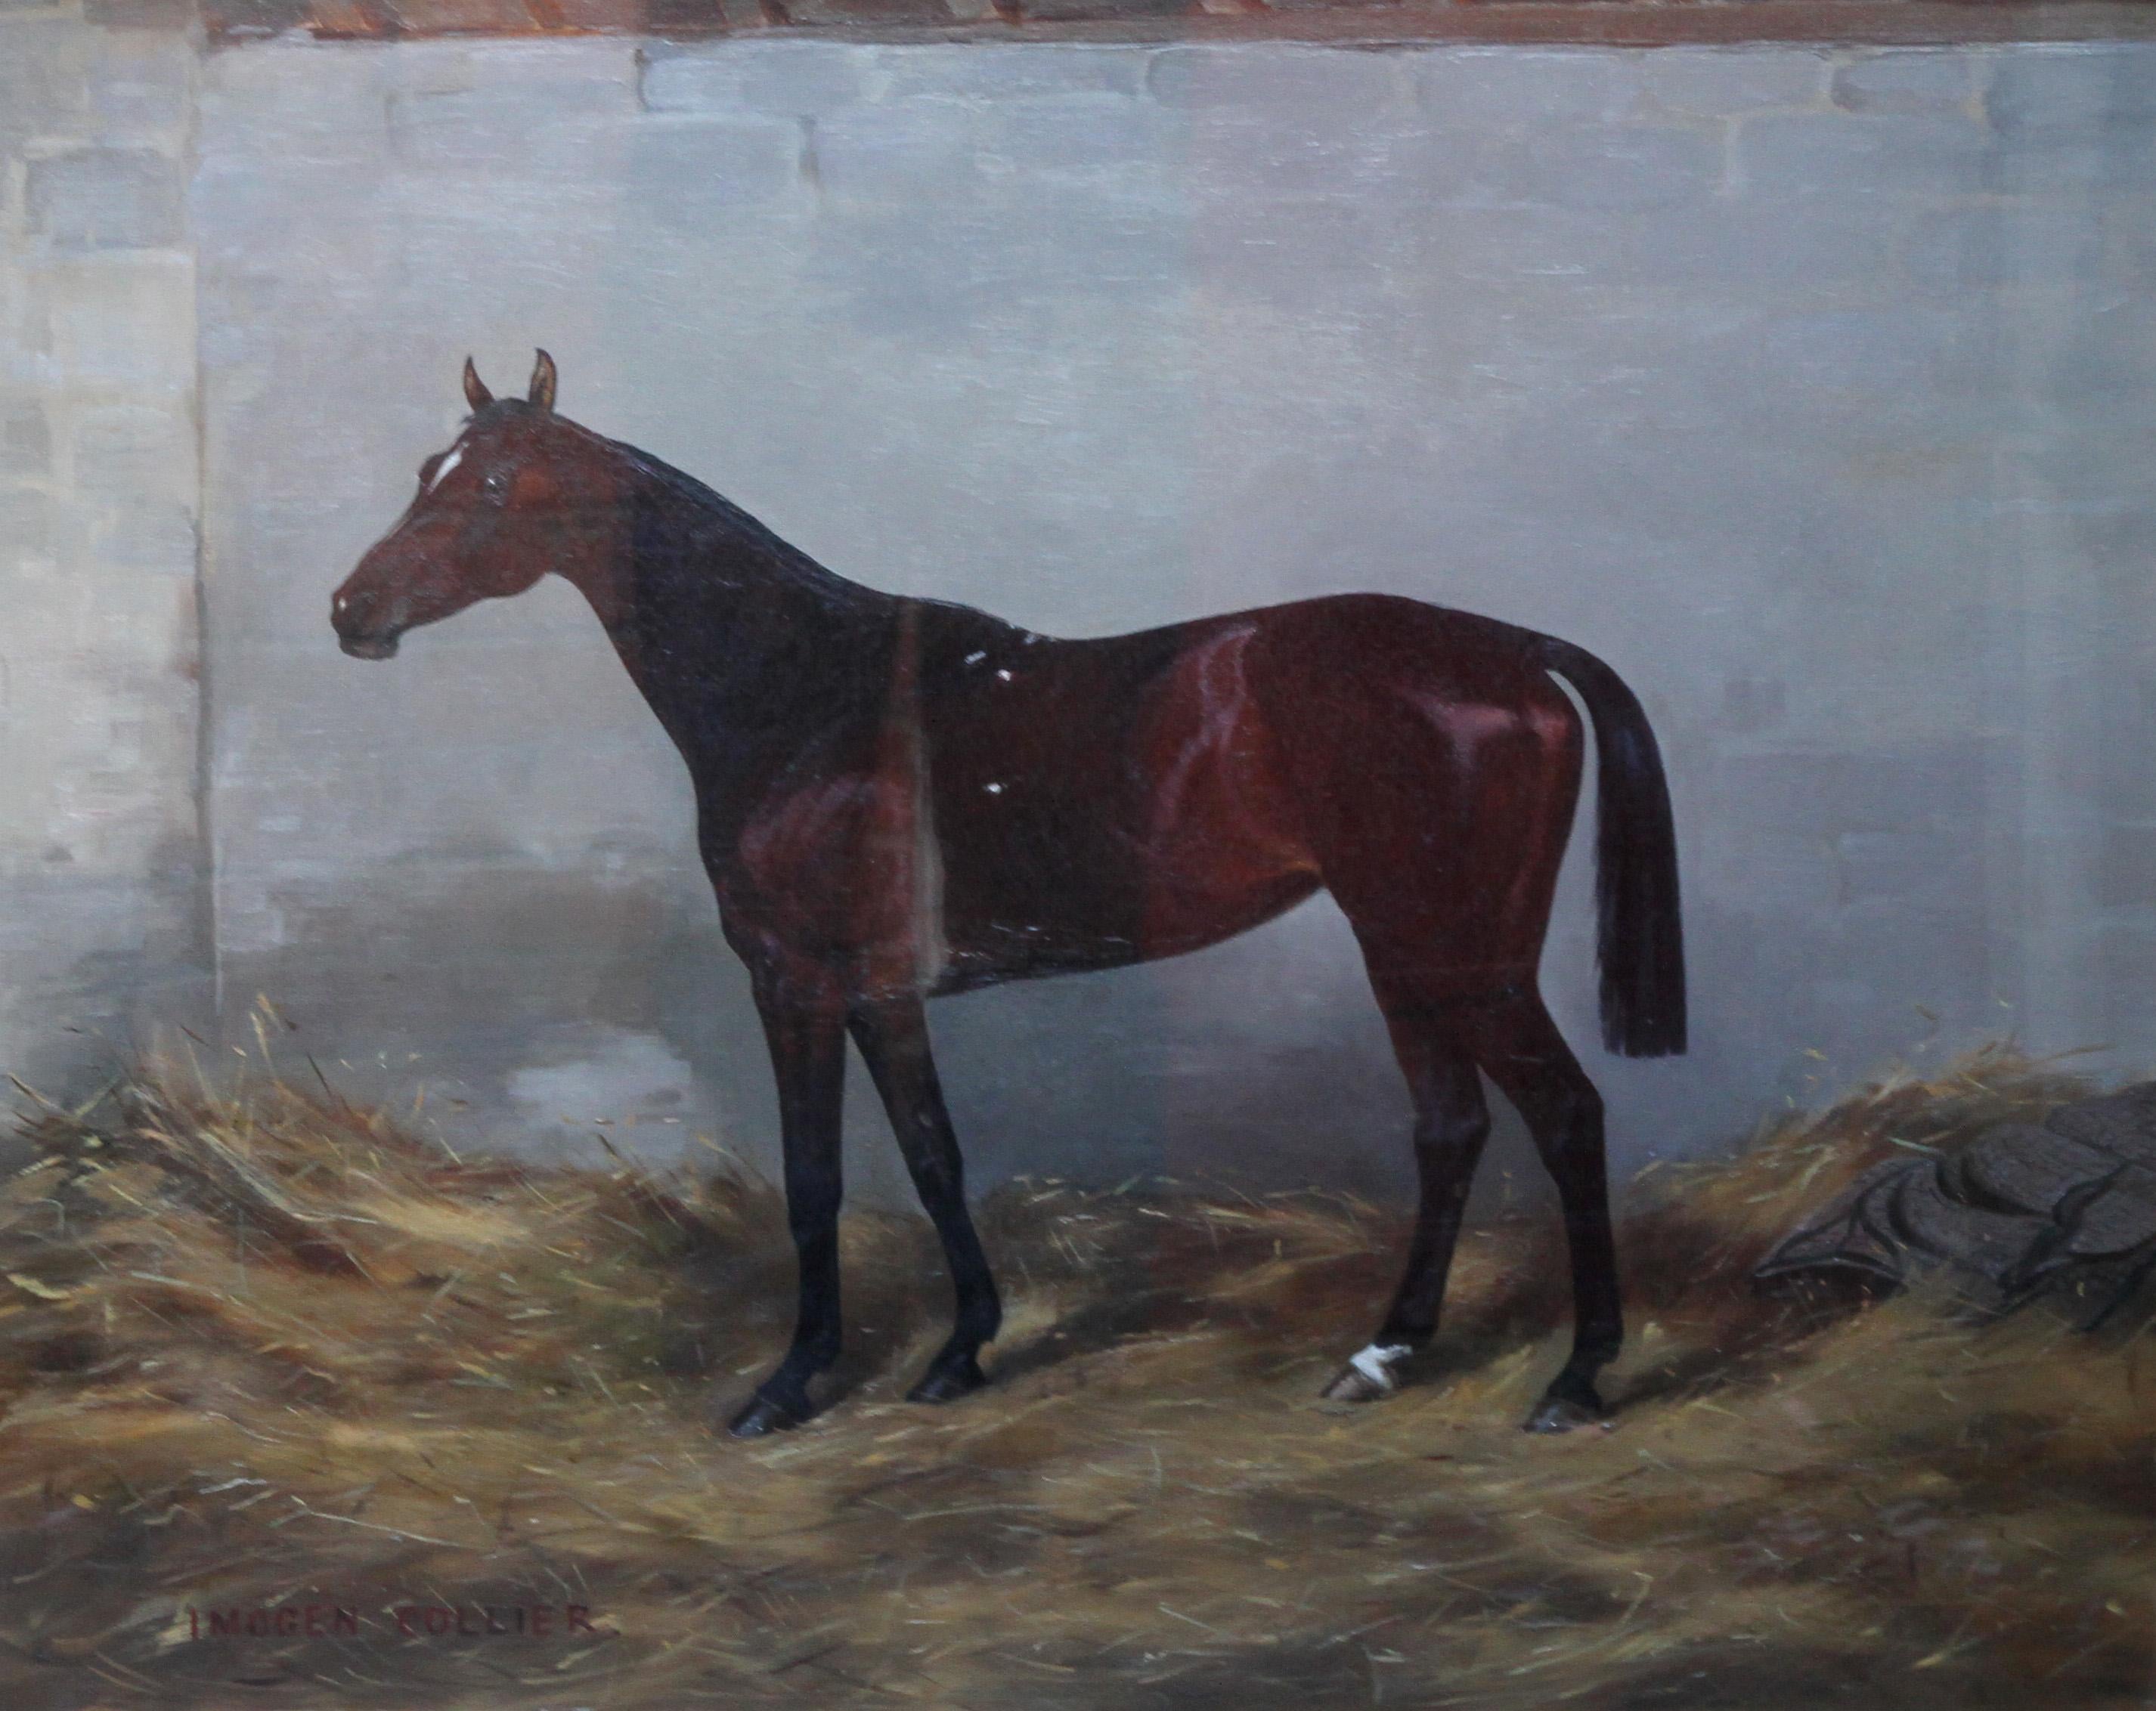 Honeys - Race Horse - British 20th century art horse portrait oil painting  - Painting by Imogen Mary Collier